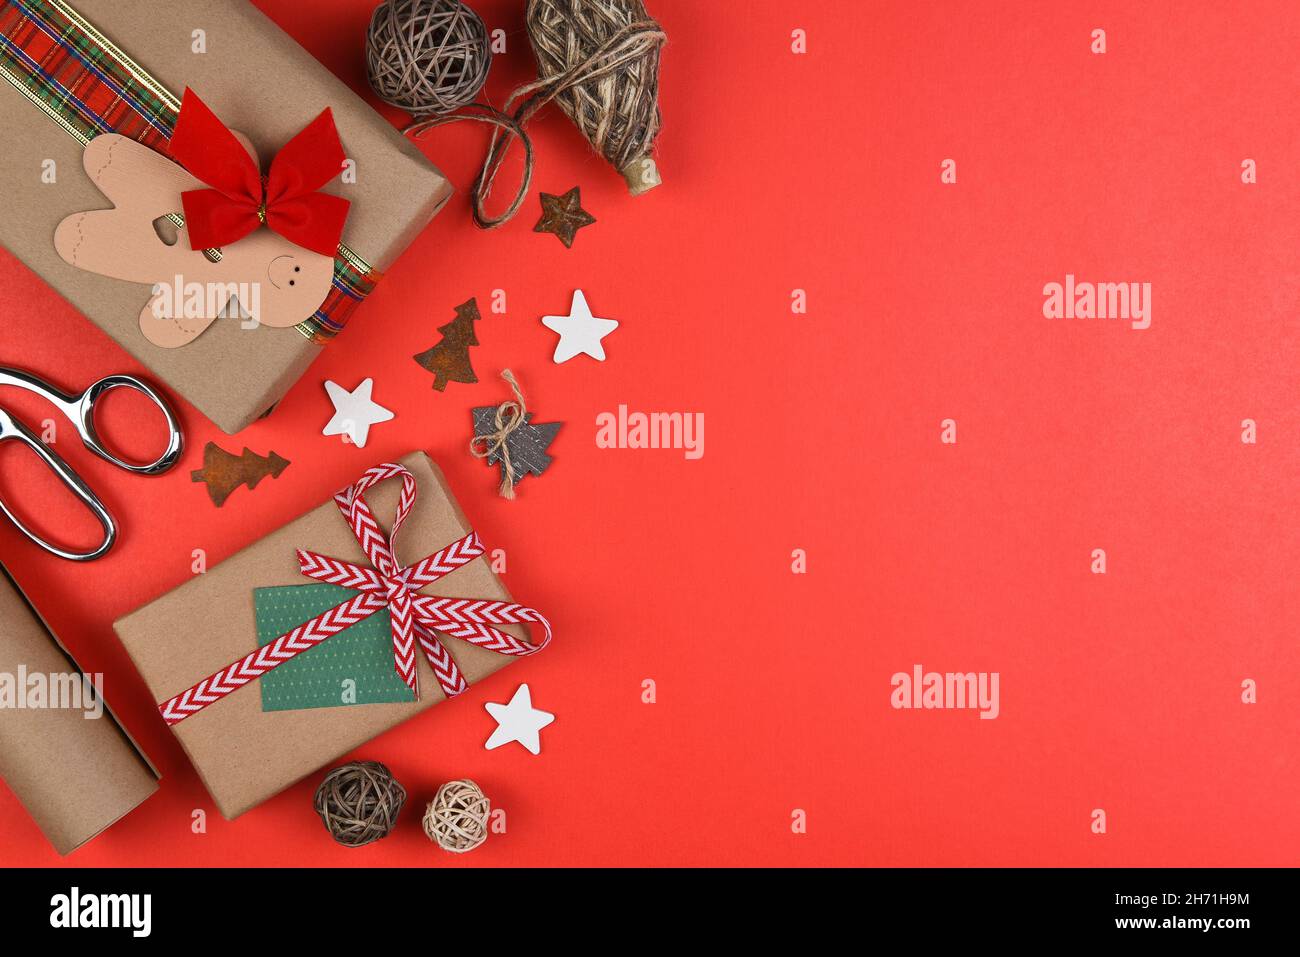 Christmas holiday flat lay miminal composition with copy space on the right side of red a background. Stock Photo